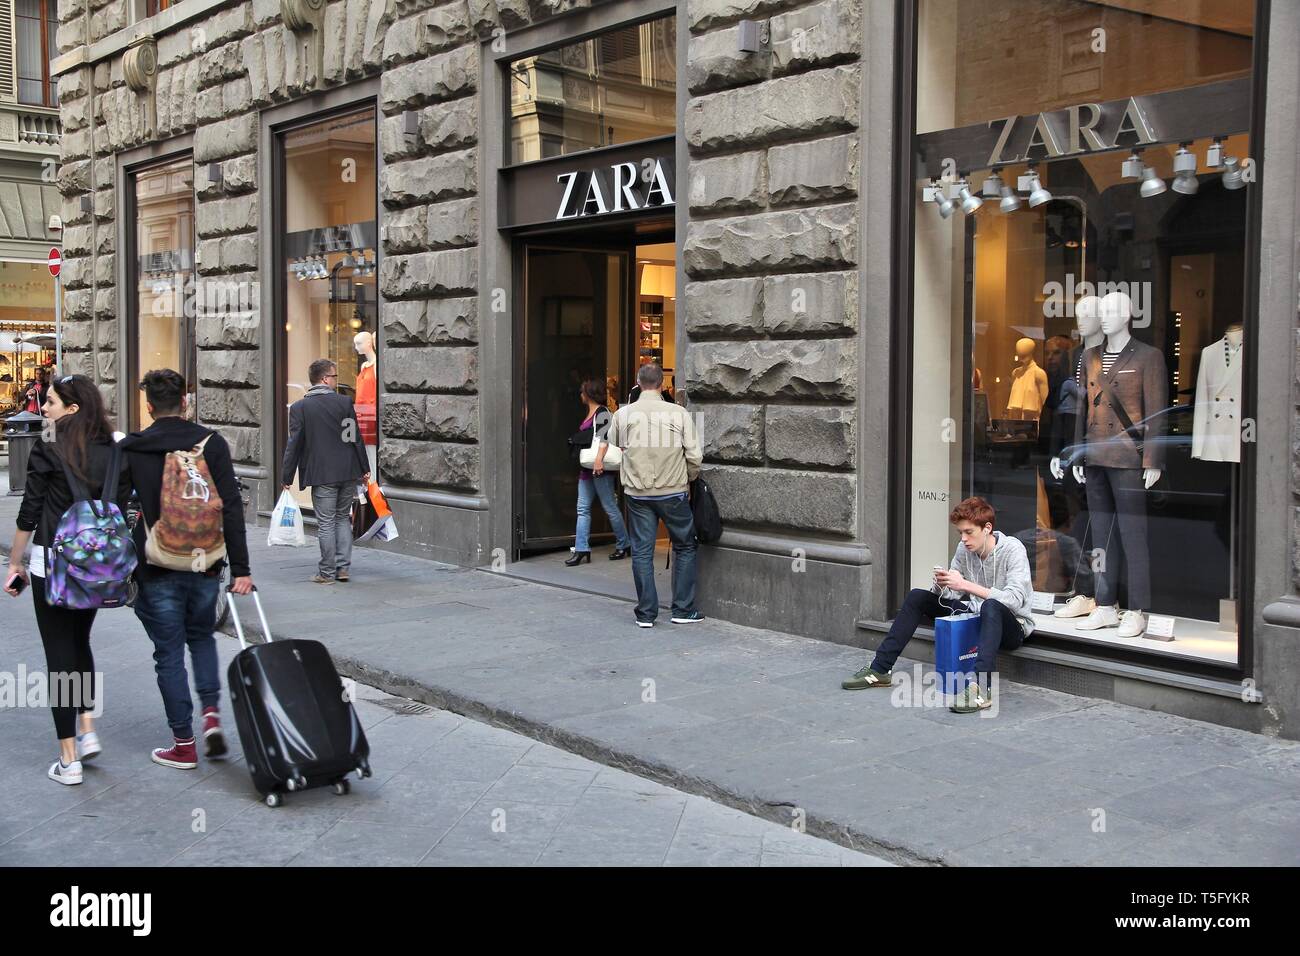 FLORENCE, ITALY - APRIL 30, 2015: People shop at Zara fashion store in  Florence. Zara was founded in 1975 and is present in 73 countries (2012  Stock Photo - Alamy